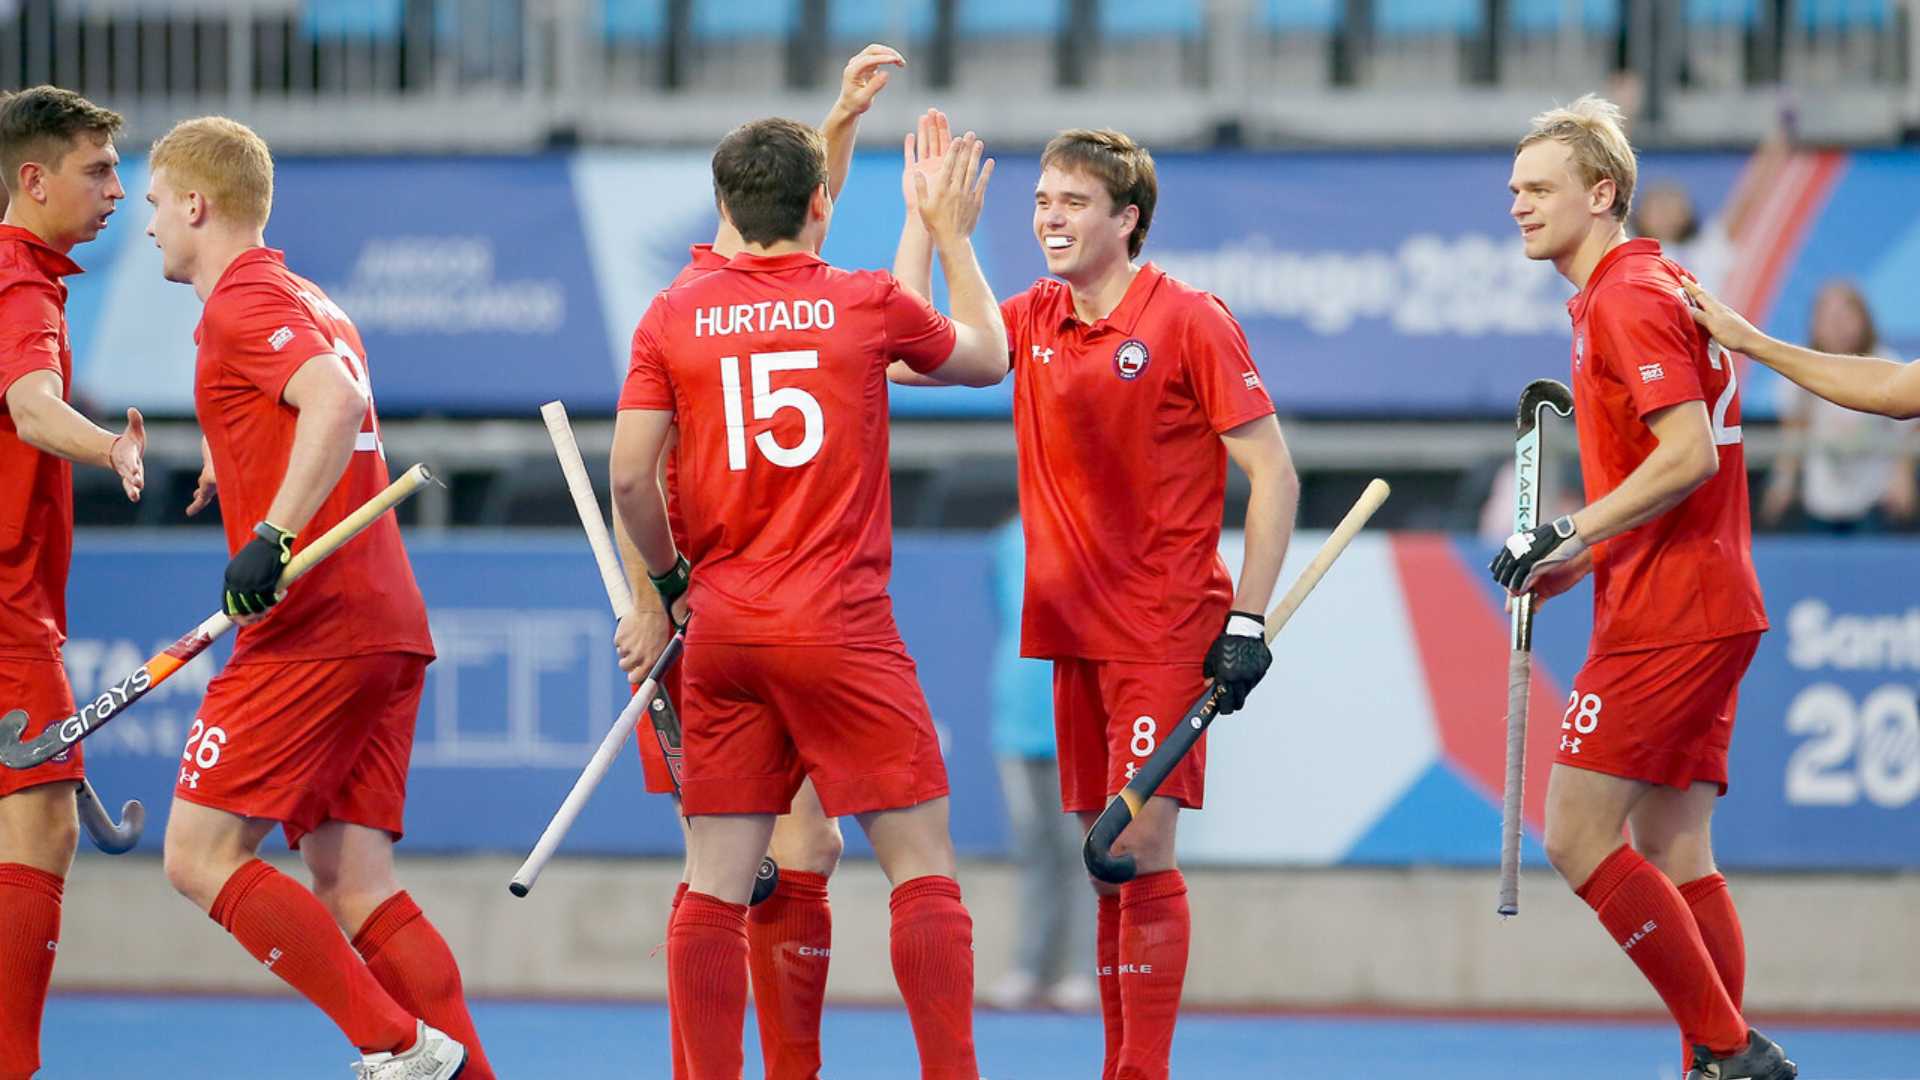 Chile get off to strong start in field hockey